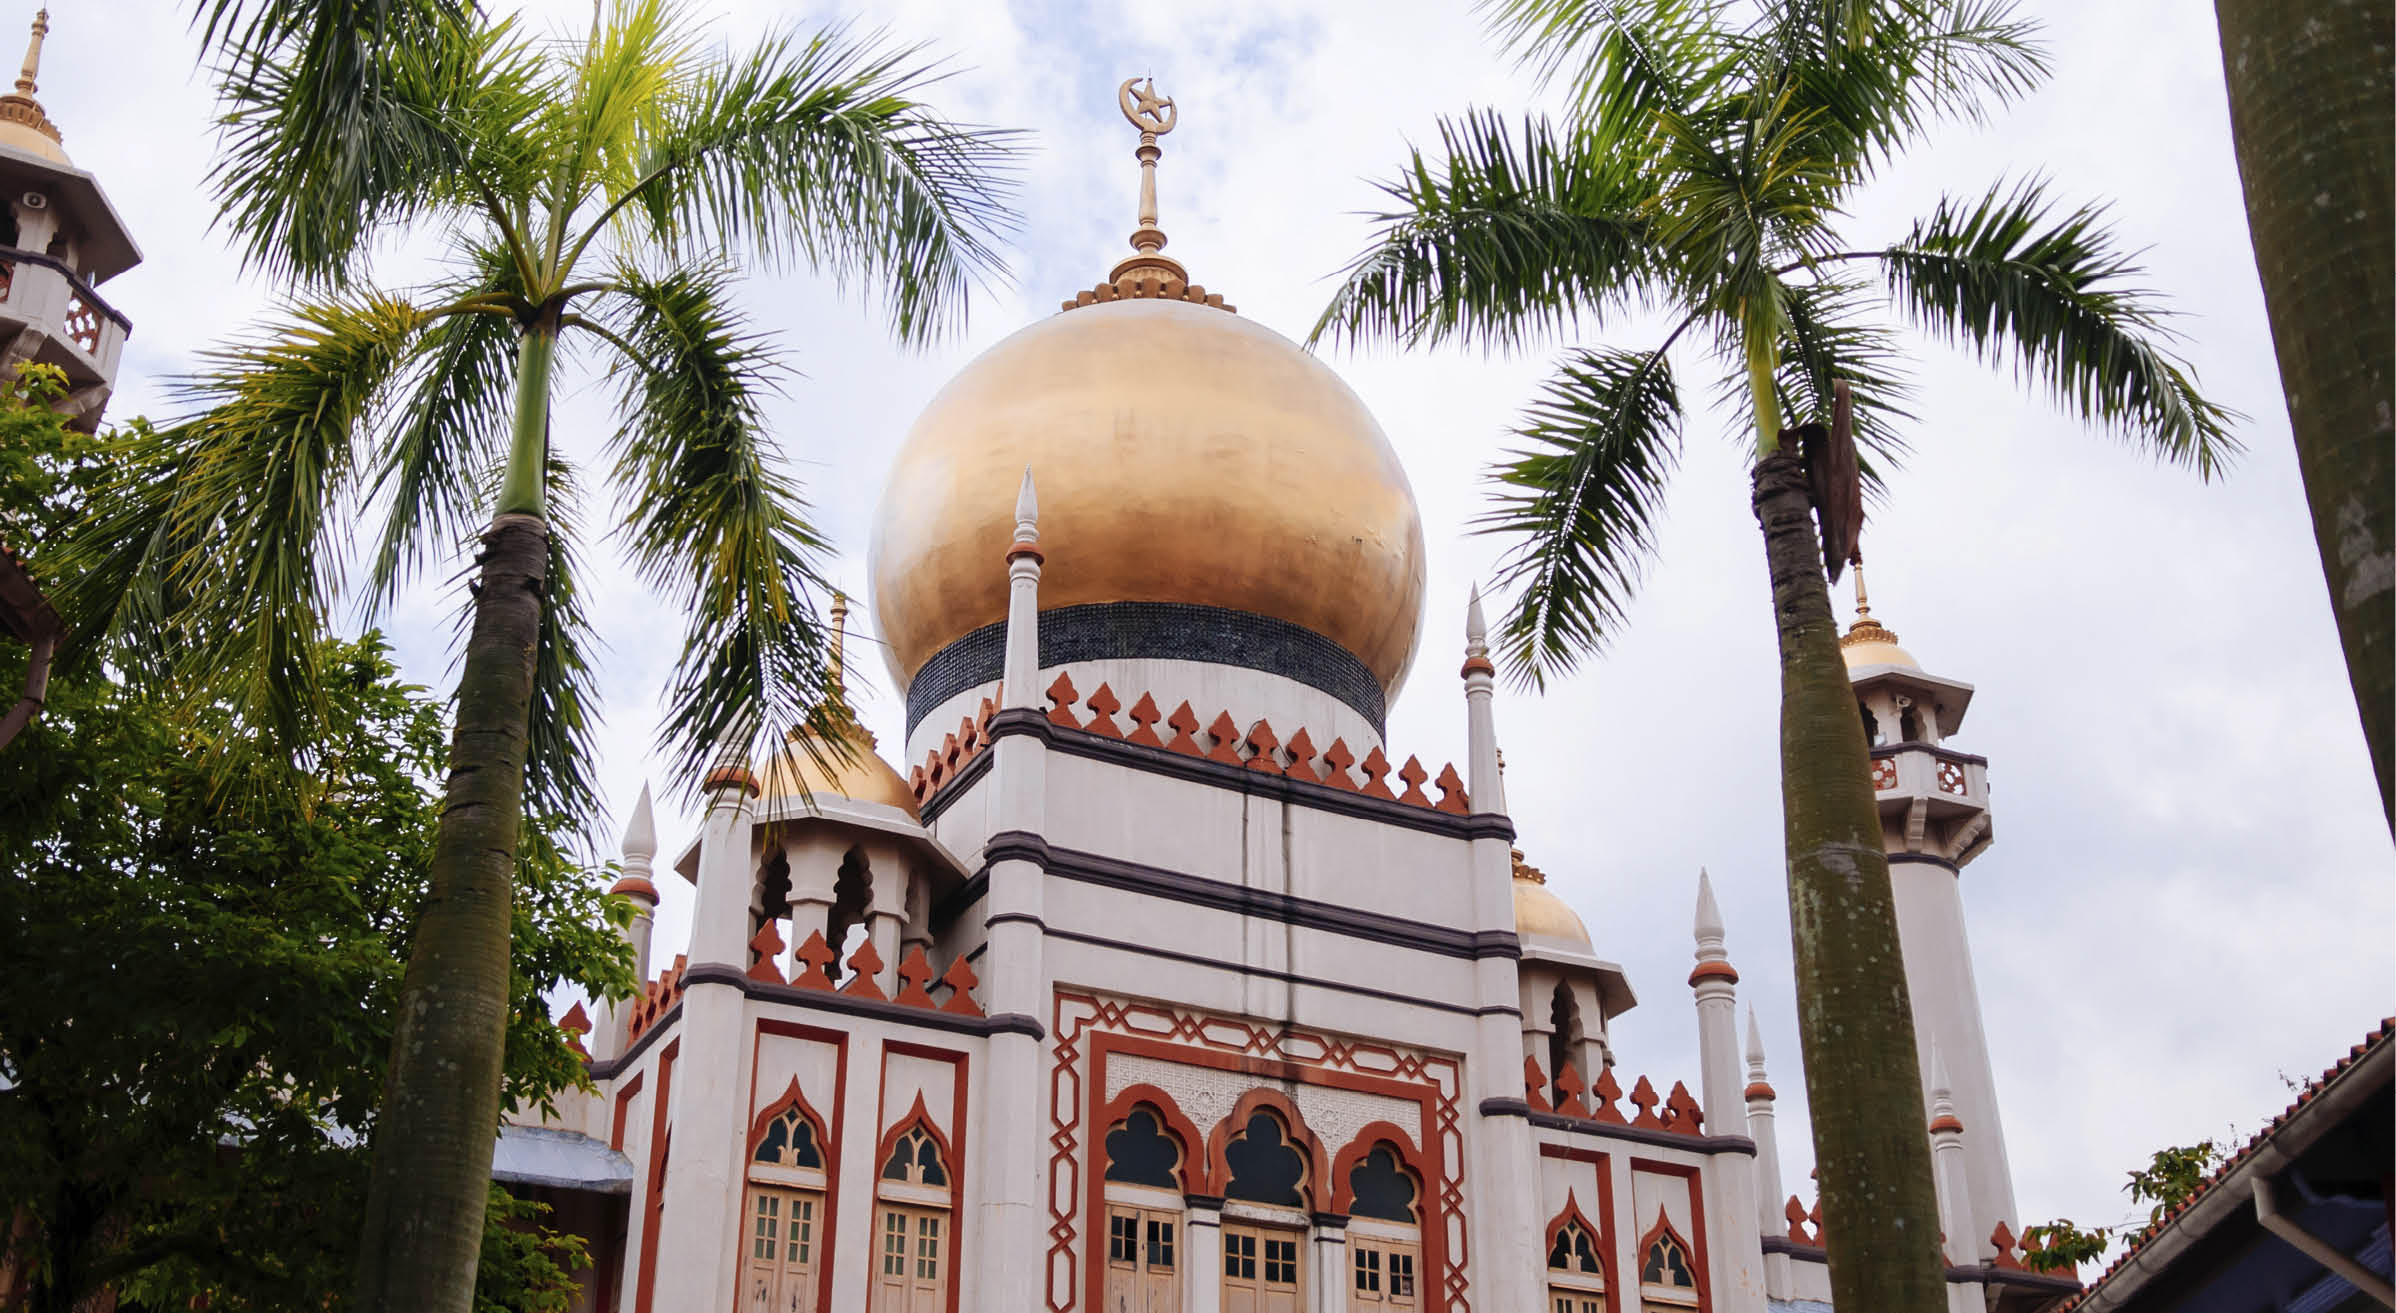 Golden dome of Masjid Sultan or Sultan mosque in Kampong Glam, Rochor district - Singapore